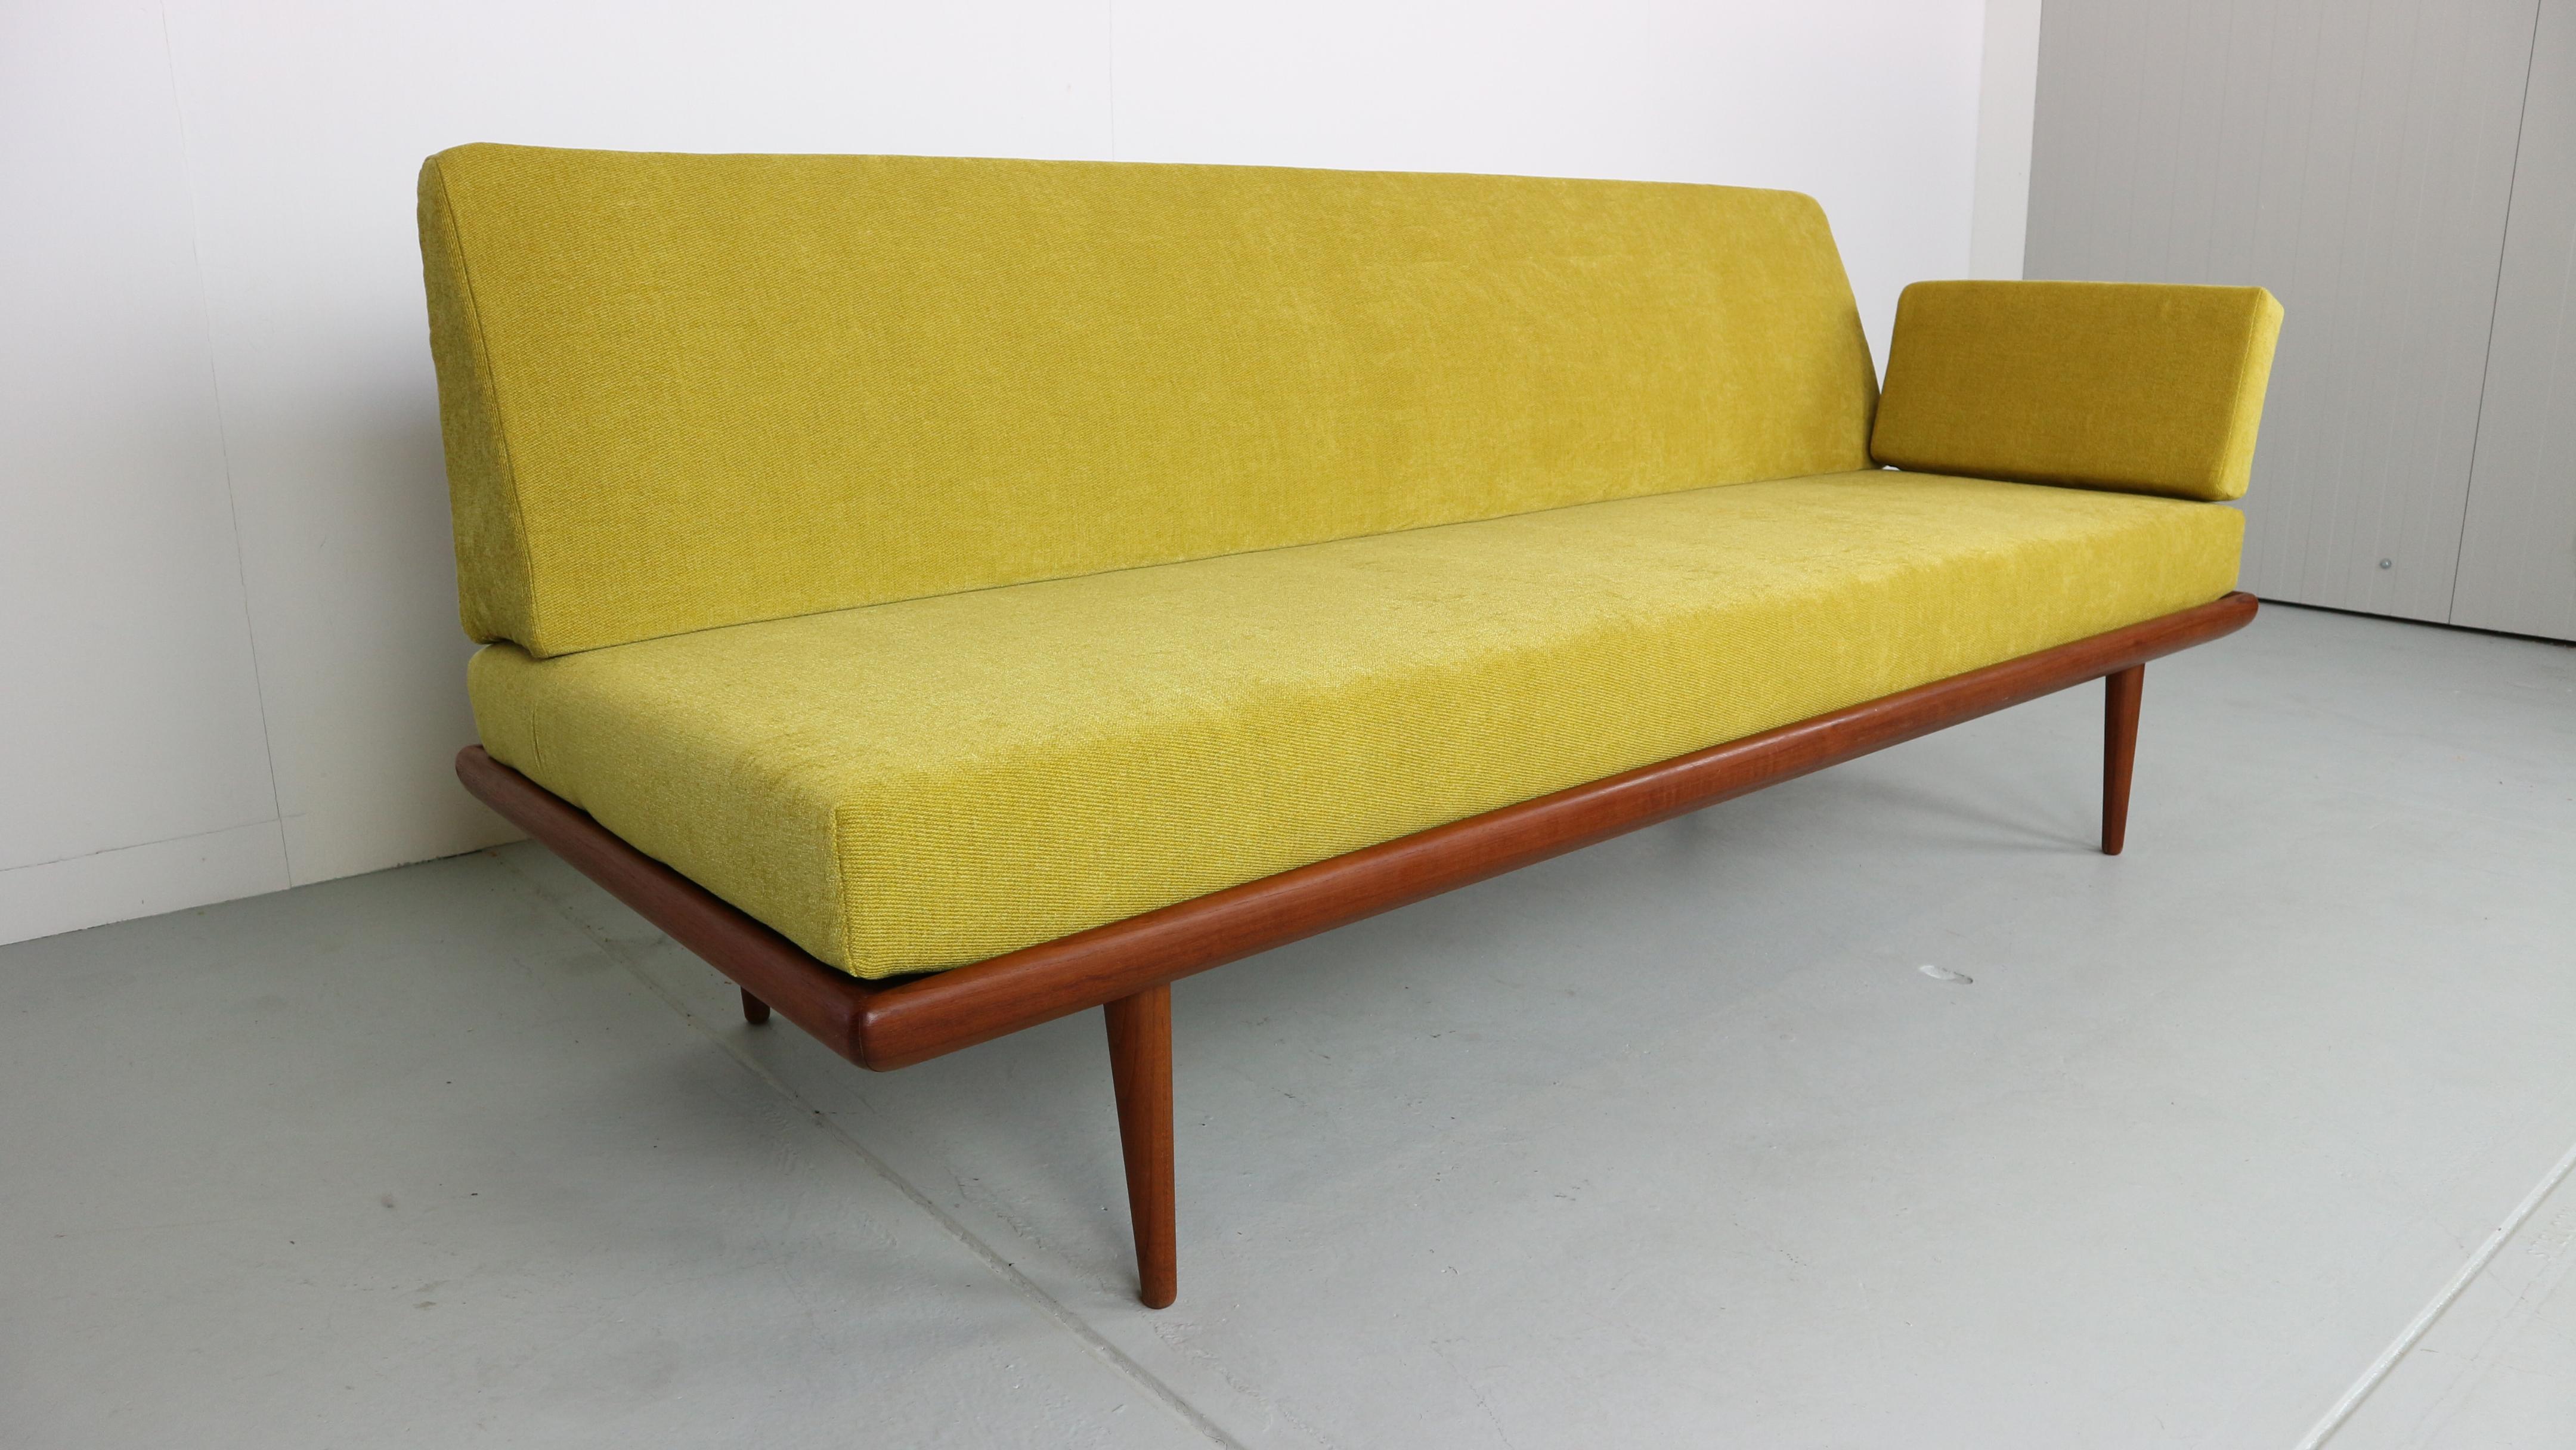 Amazing Minerva sofa by Peter Hvidt & Orla Mølgaard Nielsen for France & Son Denmark 1960s teak. Very good condition, new upholstery and covered in new high quality fabric.
Marked with France & Son golden script in the wood.